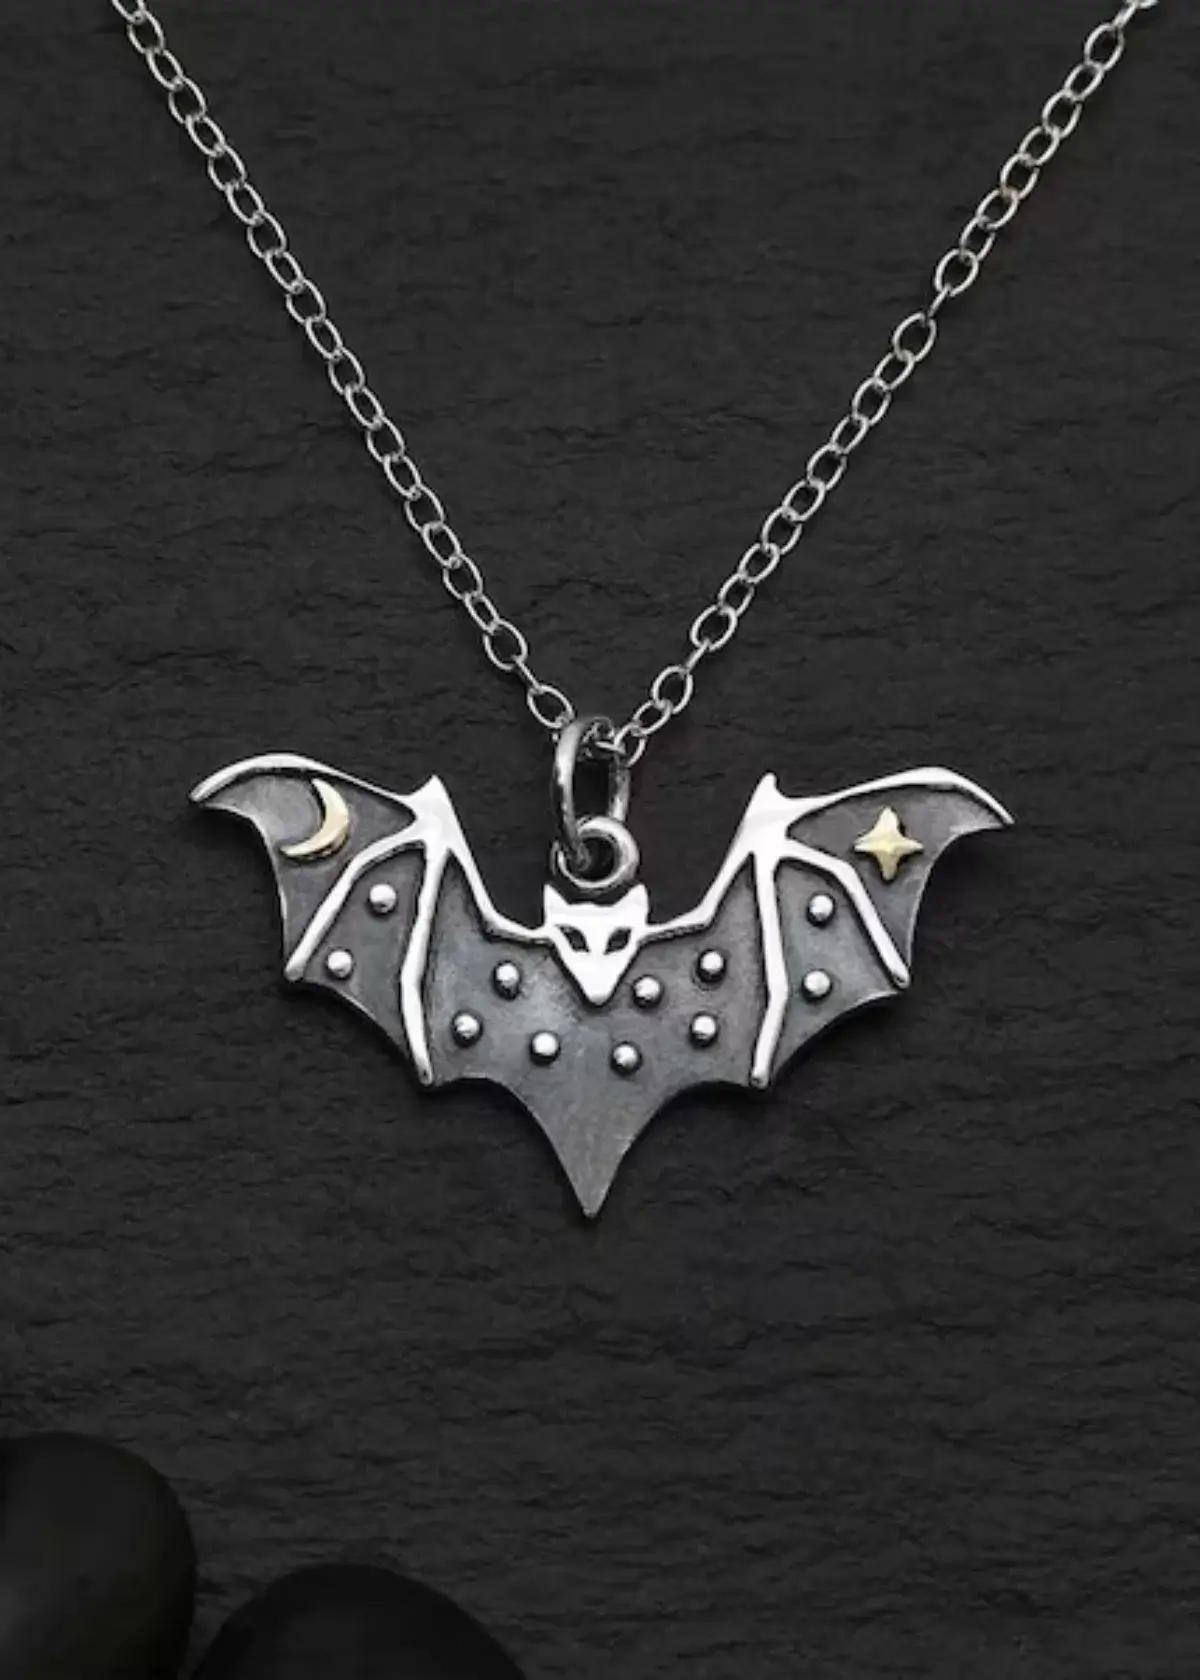 Are bat necklaces suitable for everyday wear?